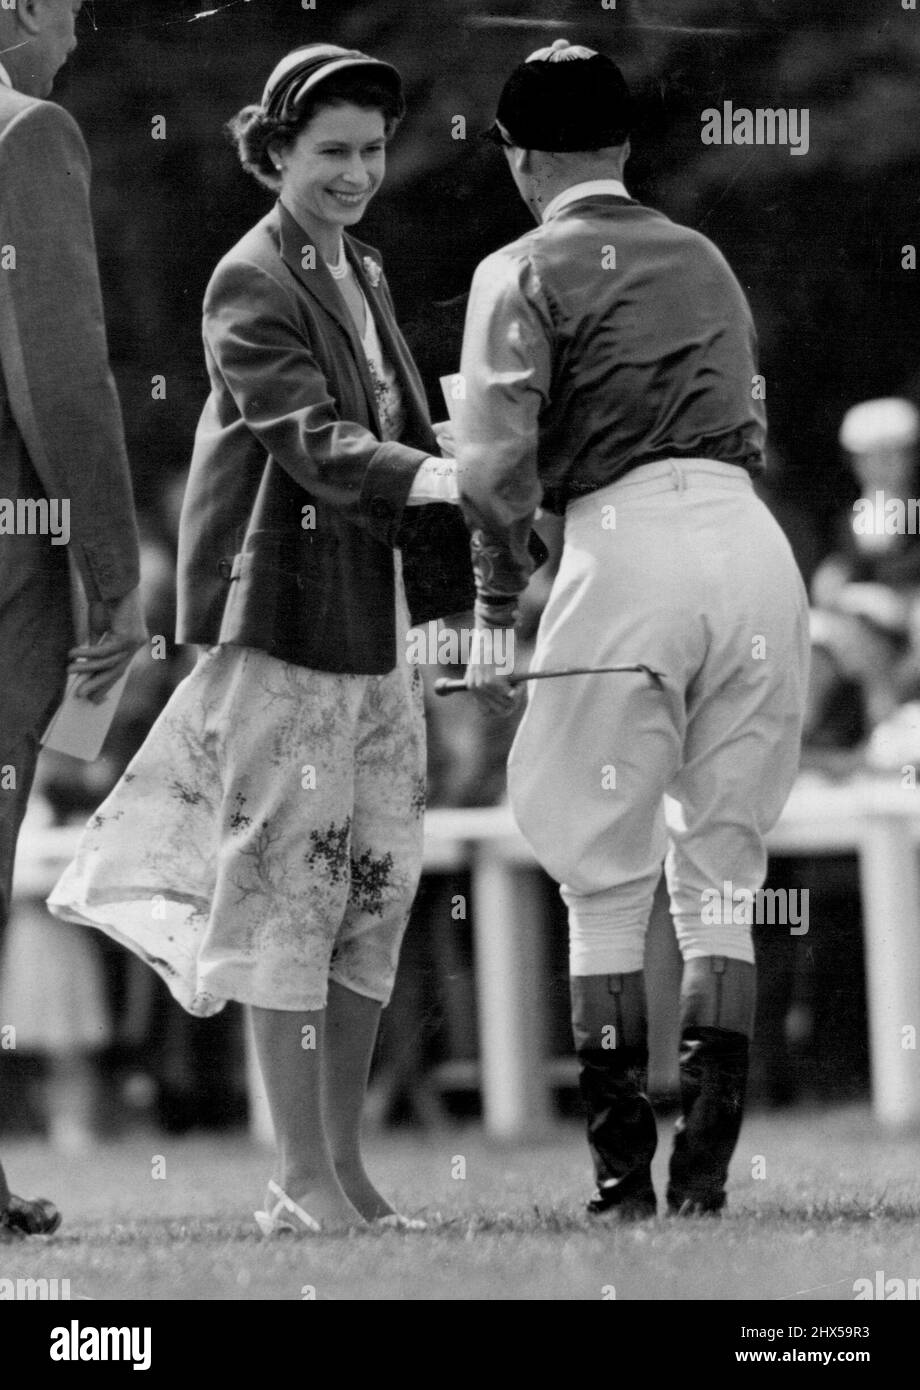 The Queen At Epsom Today -- Smiling radiantly, H.M. The Queen is seen wishing her jockey W.H. Carr 'Good Luck' prior to the Oaks Stake at Epsom today, in which her filly 'Angel Bright' was a runner. In today's bright sunshine Her Majesty wore a floral summer dress, with short jacket of emerald green and small matching hat. June 4, 1954. (Photo by Fox Photos). Stock Photo